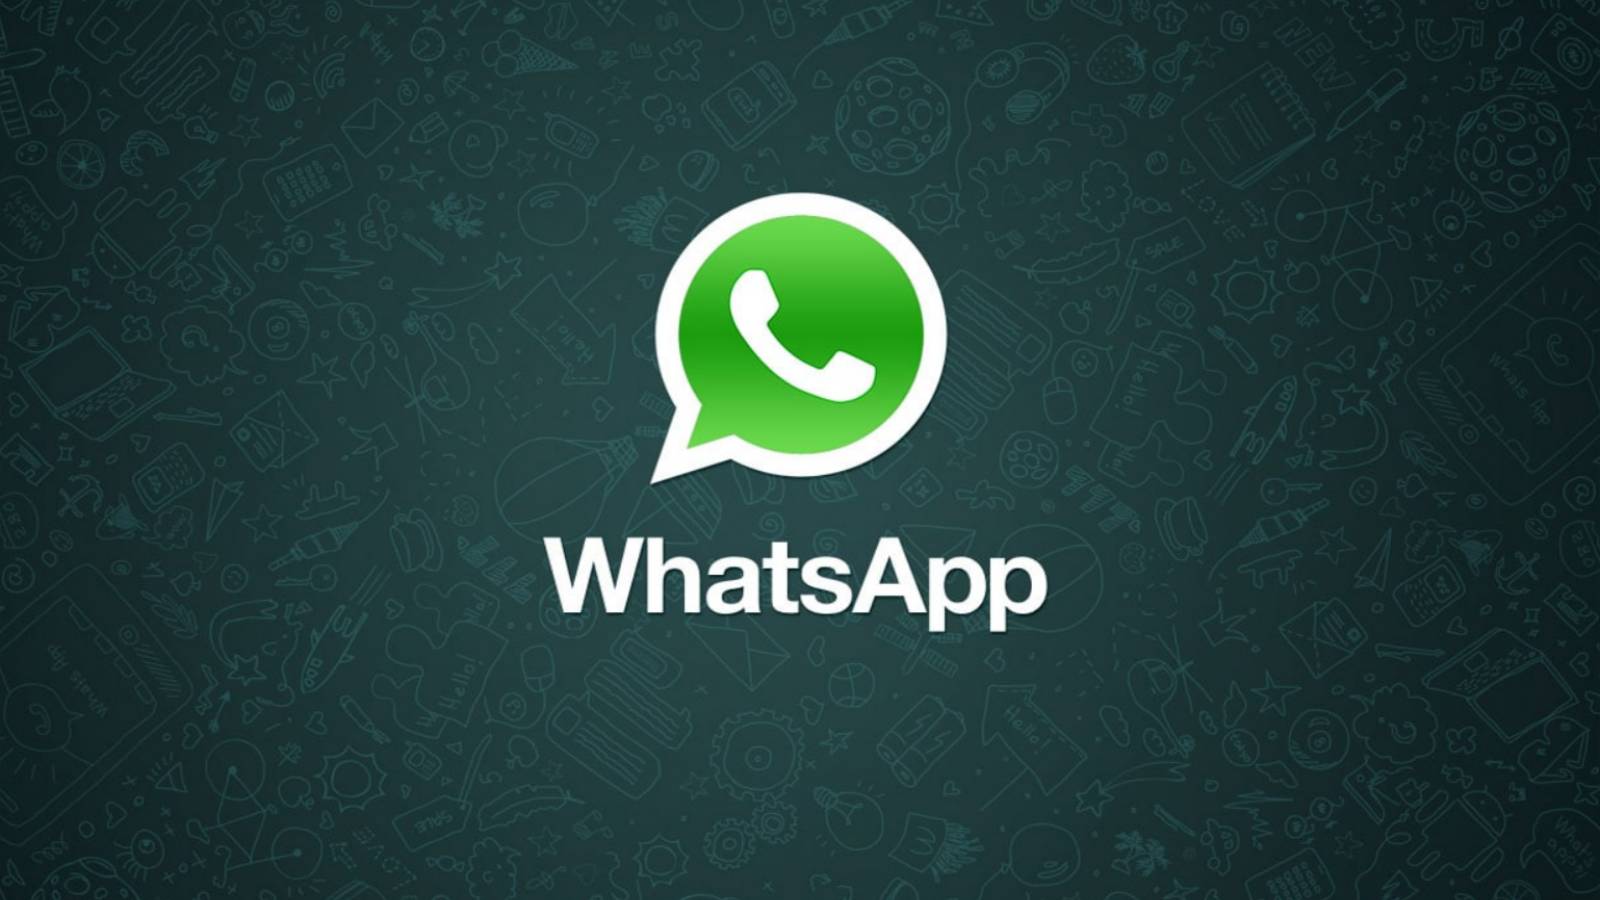 WhatsApp Works SECRET iPhone Android